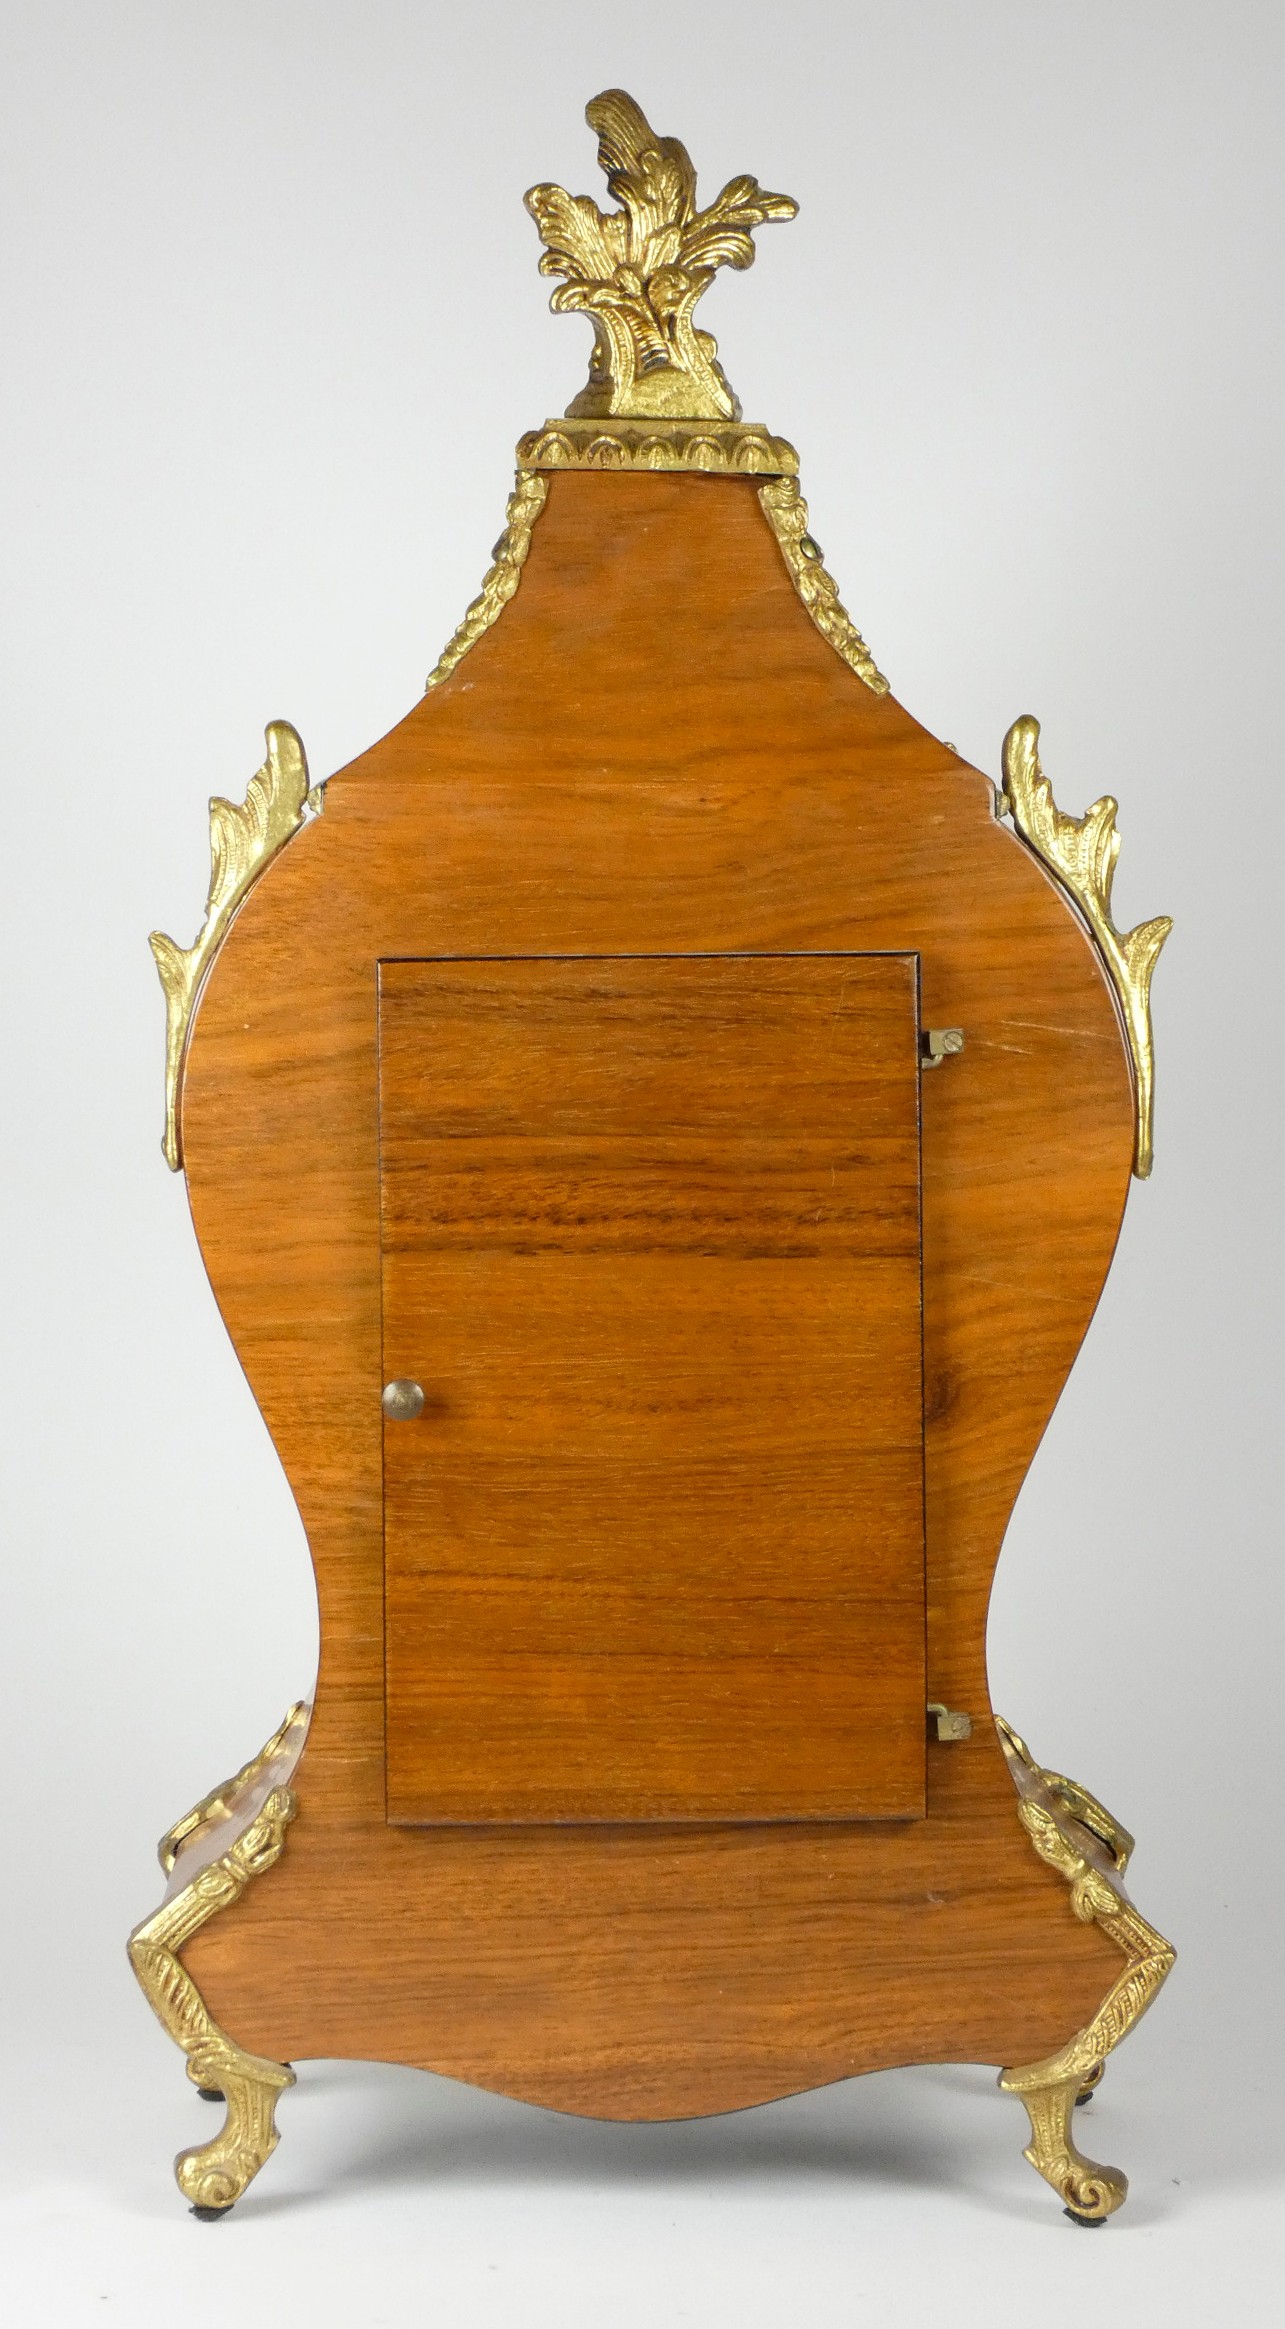 A late 19th century Louis XVI style Boule mantel clock, inlaid walnut case with applied embossed - Image 4 of 5